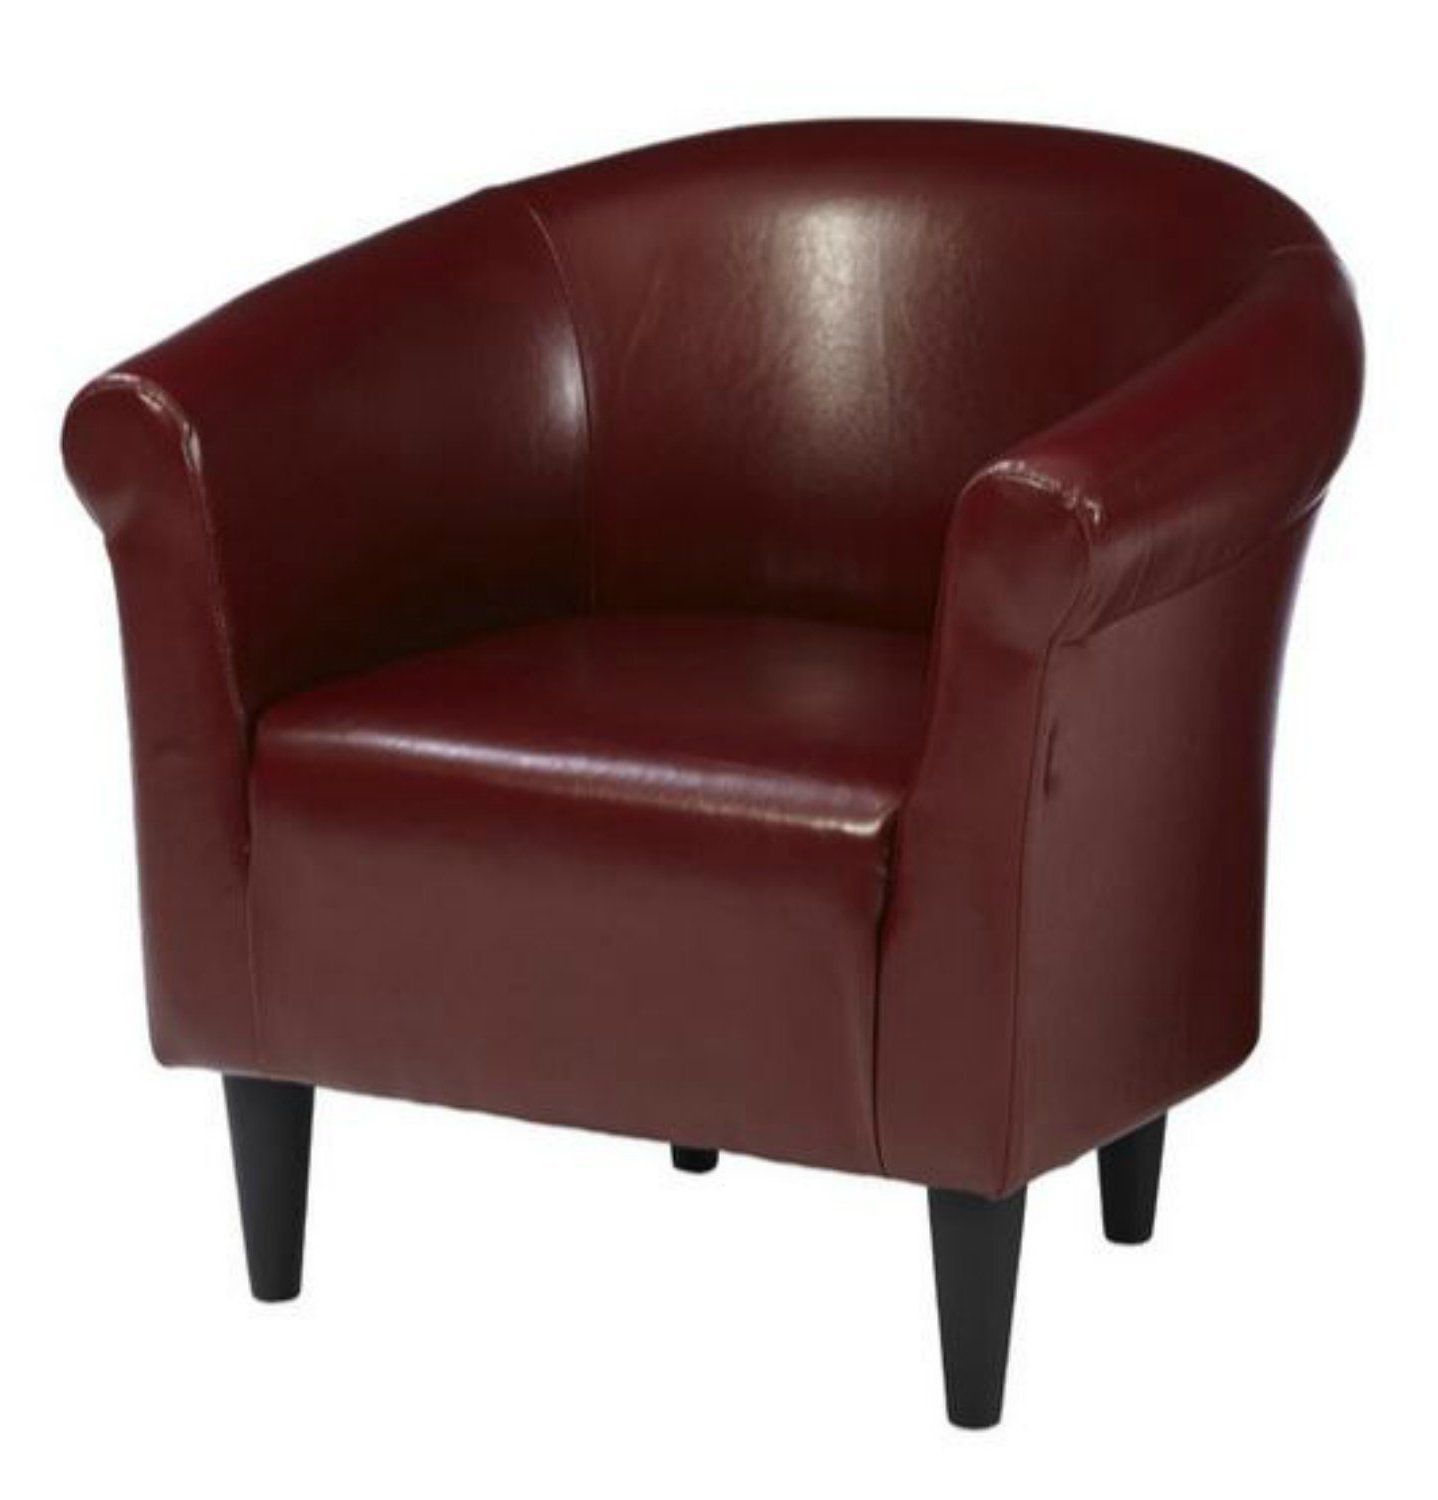 Best And Newest Amazon: Zipcode Contemporary Club Chair – This Faux Intended For Faux Leather Barrel Chairs (View 12 of 20)